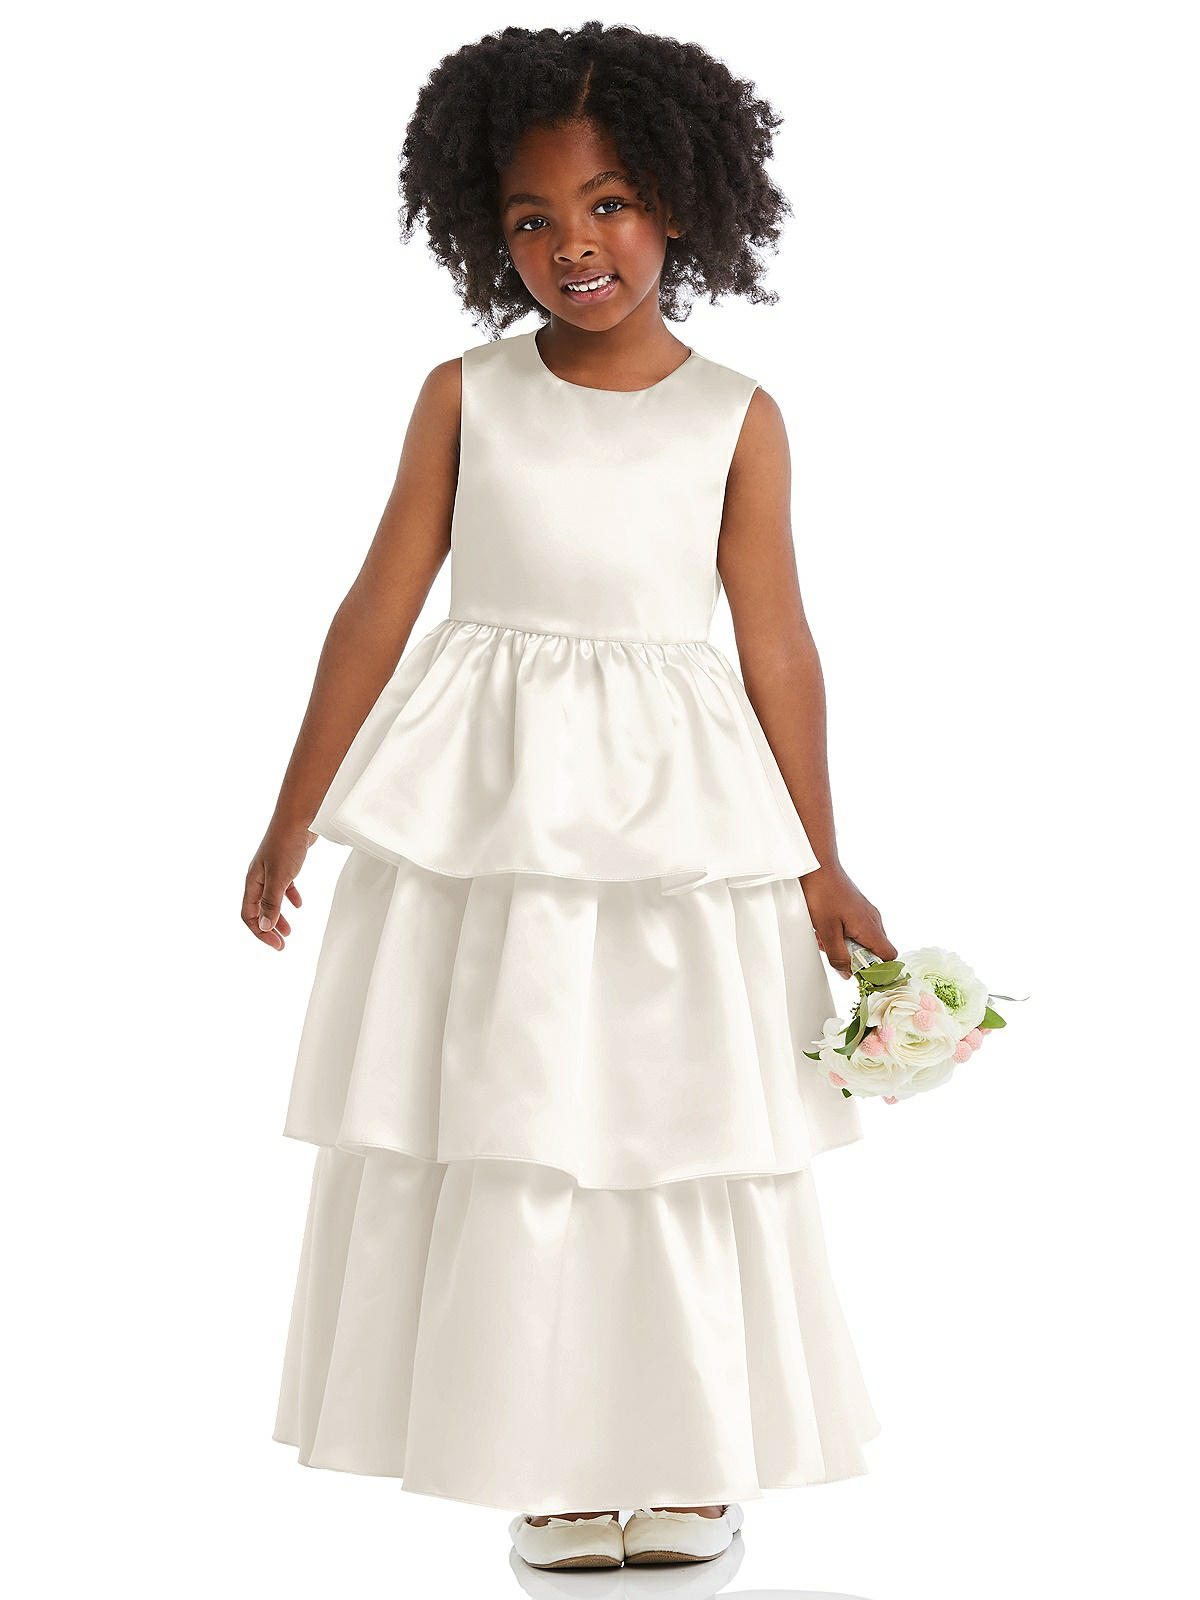 Jewel Neck Tiered Skirt Satin Dress Ivory Flower Dessy | The In Group Girl